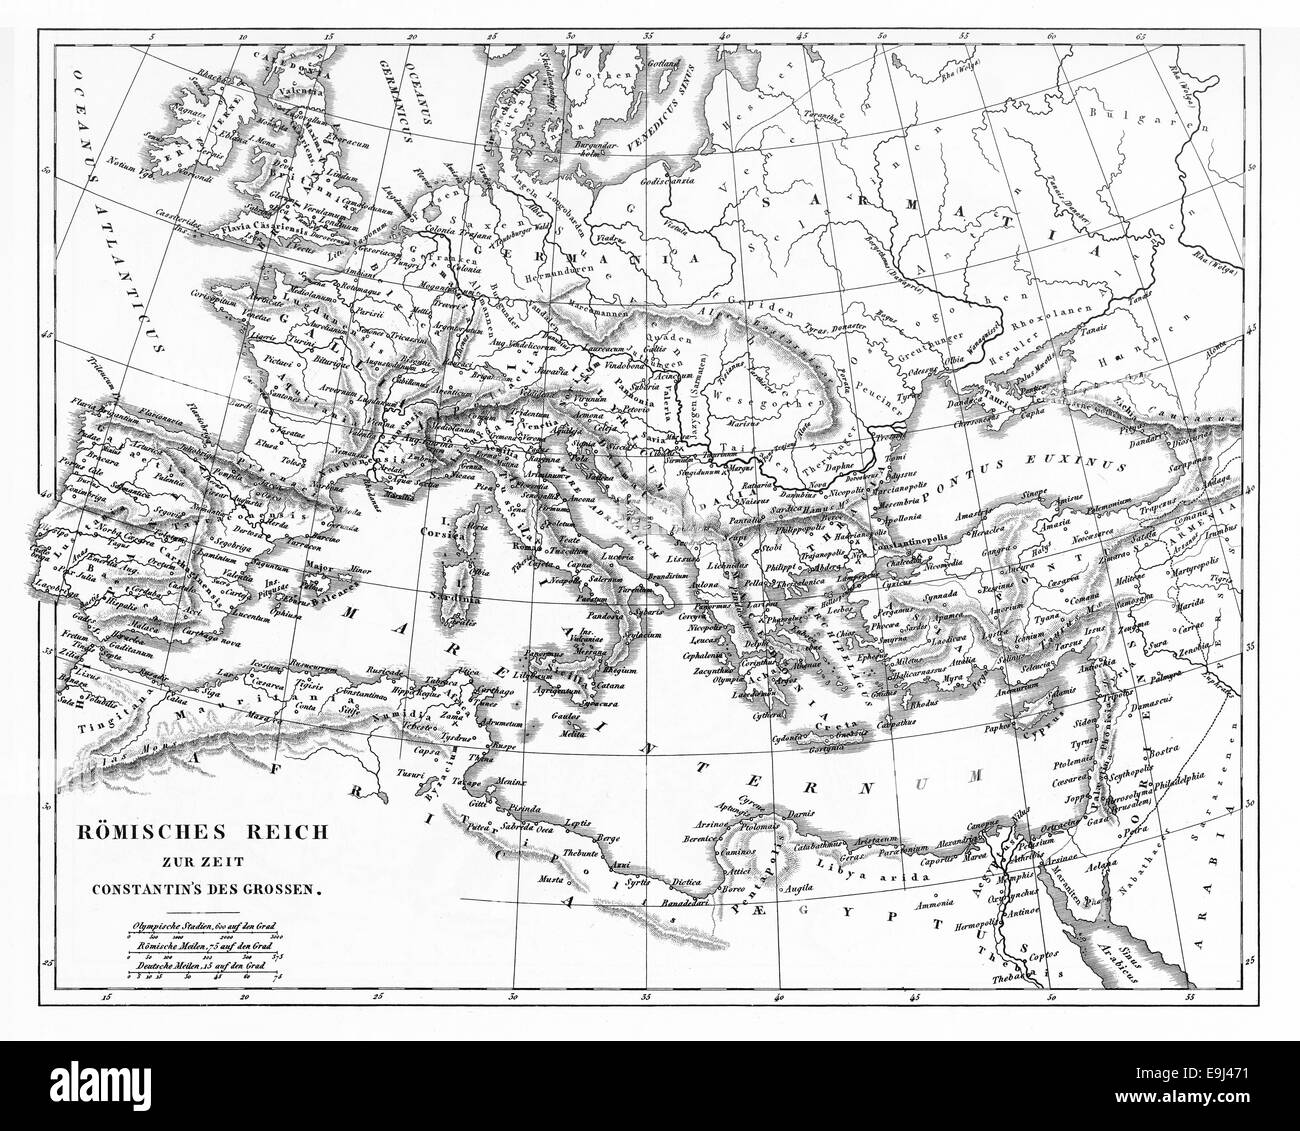 Engraved illustration of a Map of Roman Empire from Iconographic Encyclopedia of Science, Literature and Art, Published in 1851 Stock Photo